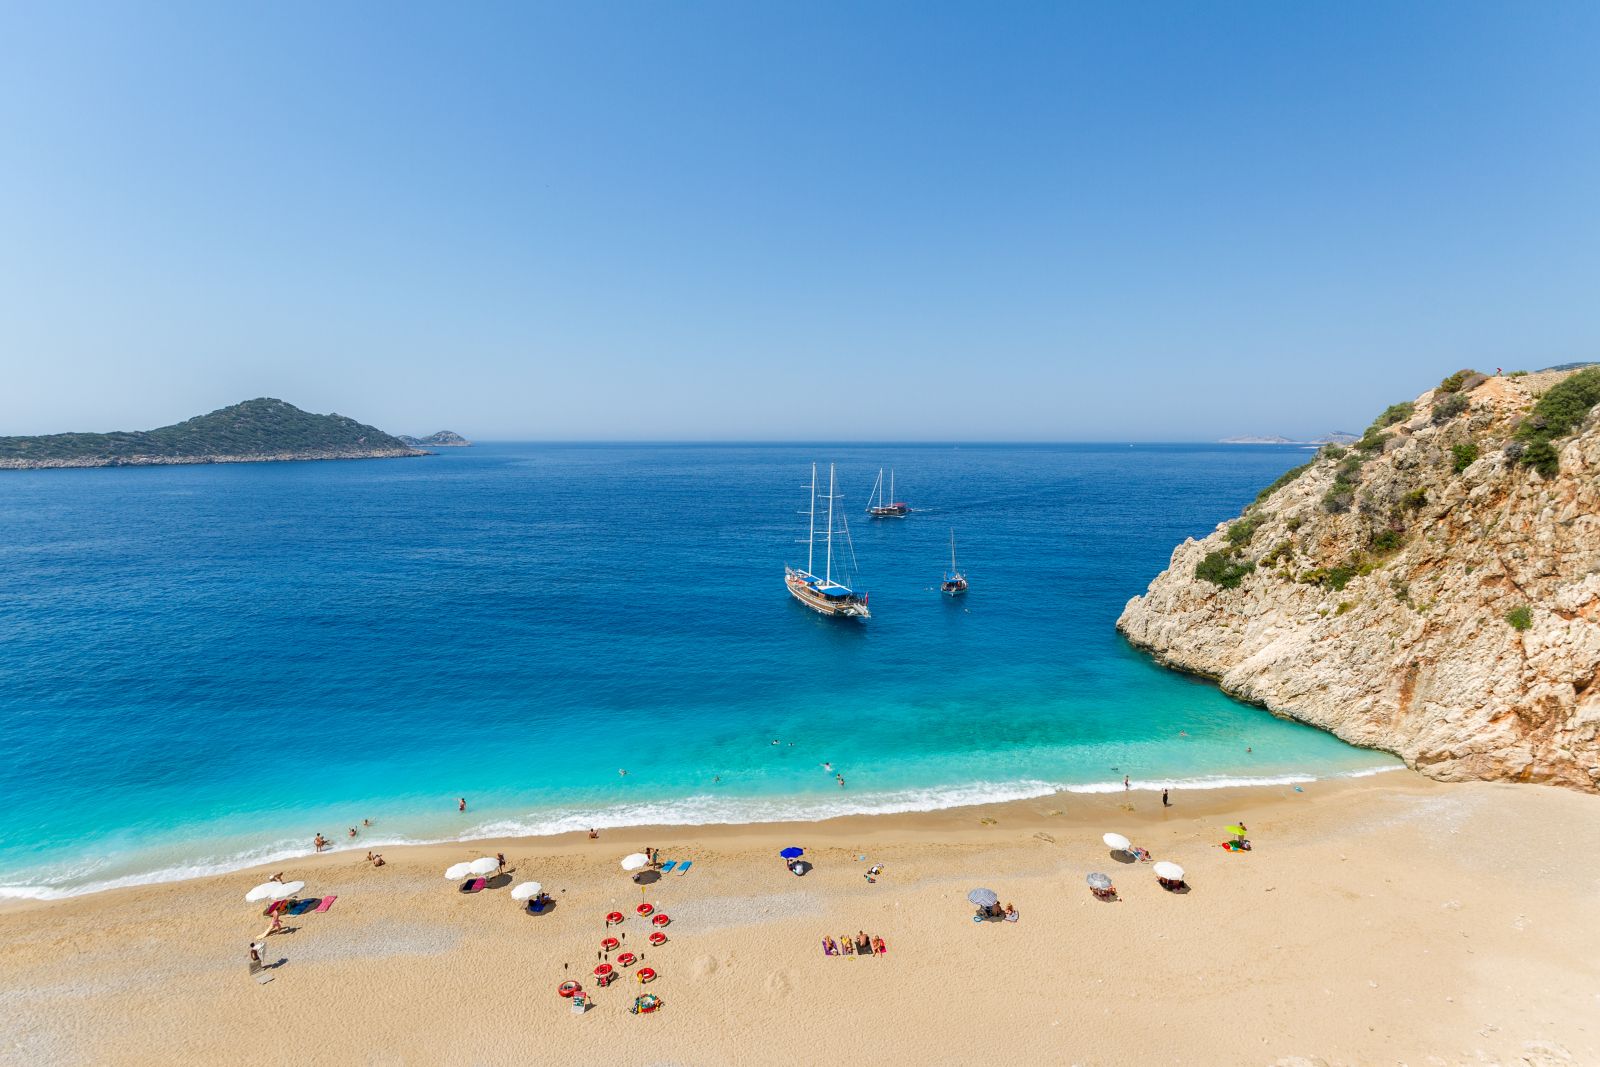 Yachts moored off a pristine beach on Turkey's Turquoise Coast